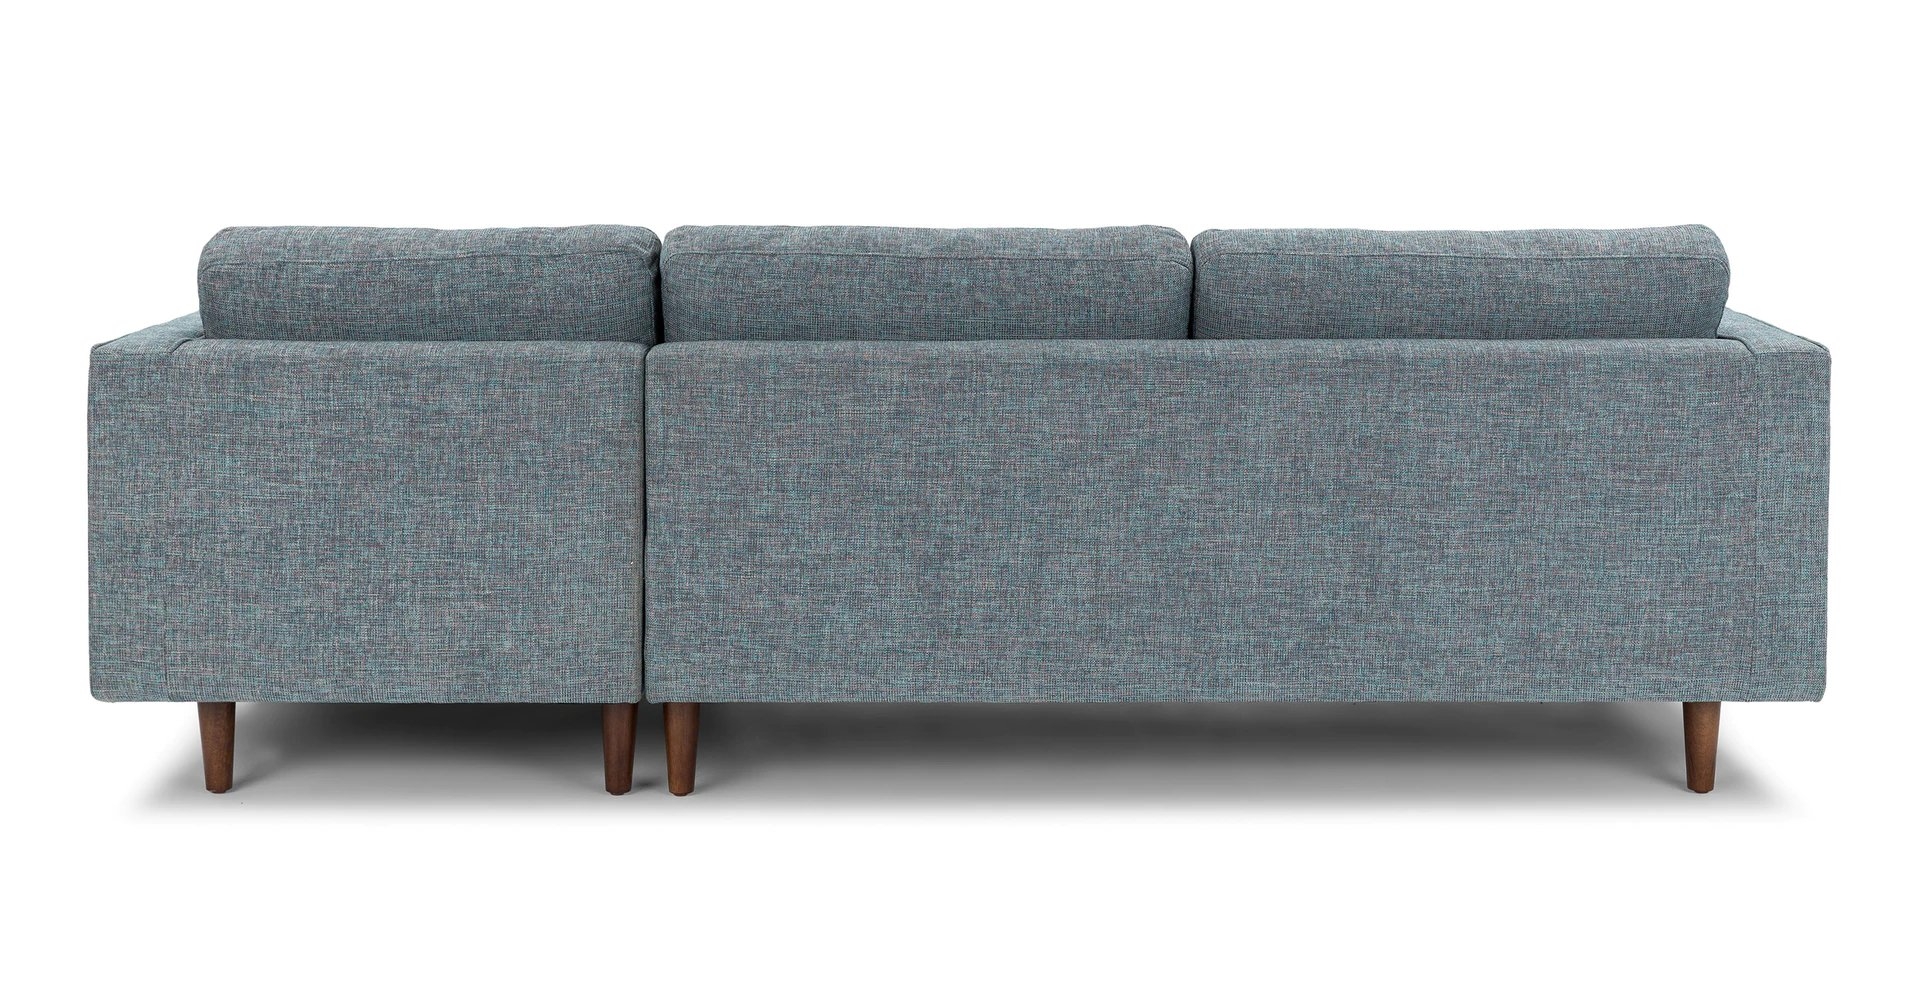 SVEN Sectional RIGHT arm sectional - AQUA - Image 2